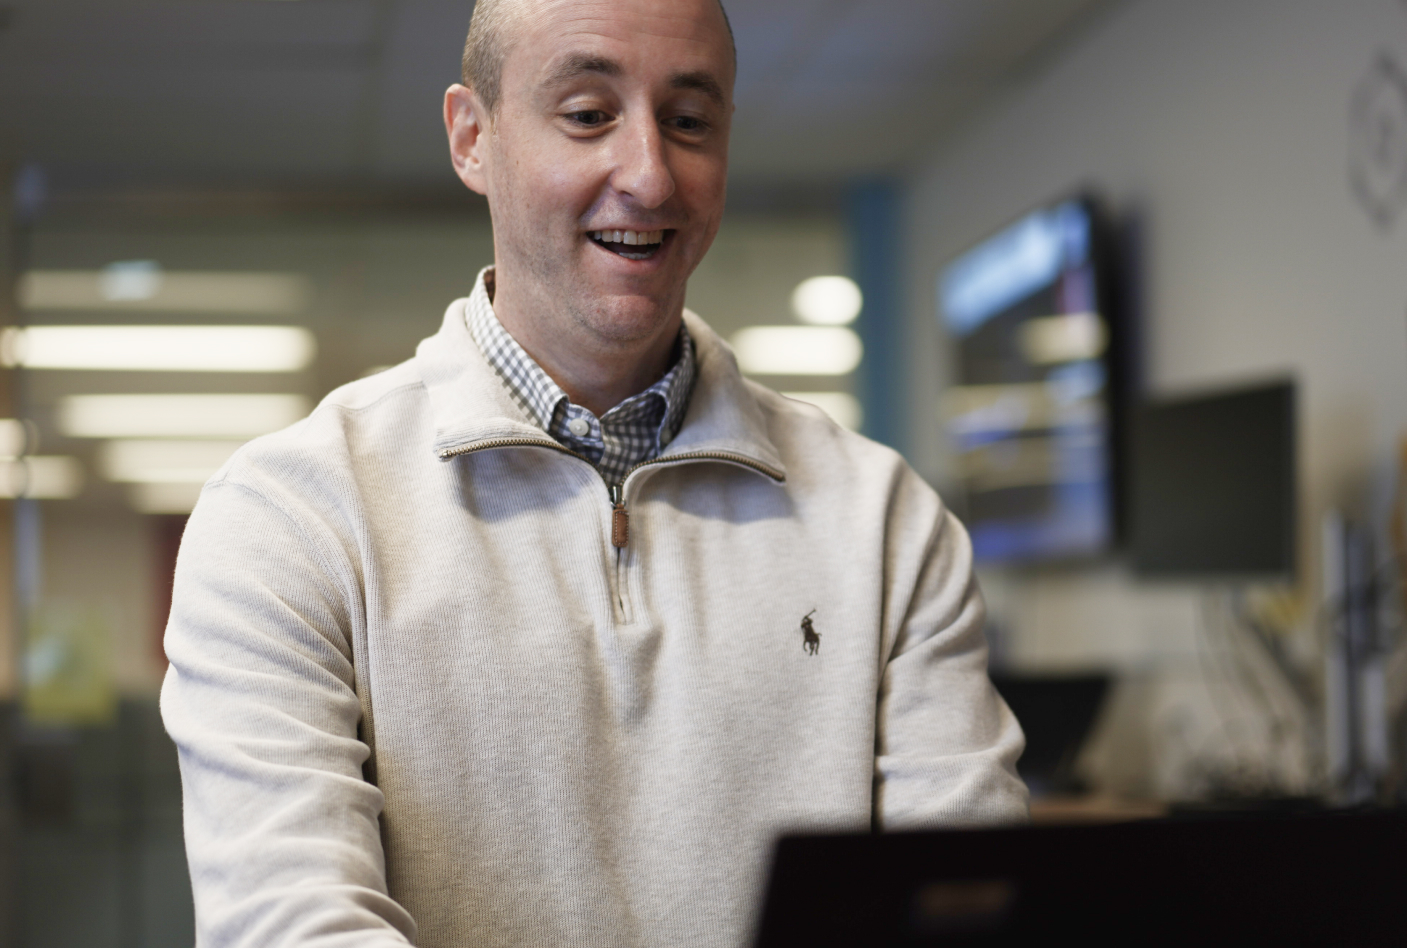 OLG employee smiling while working on computer